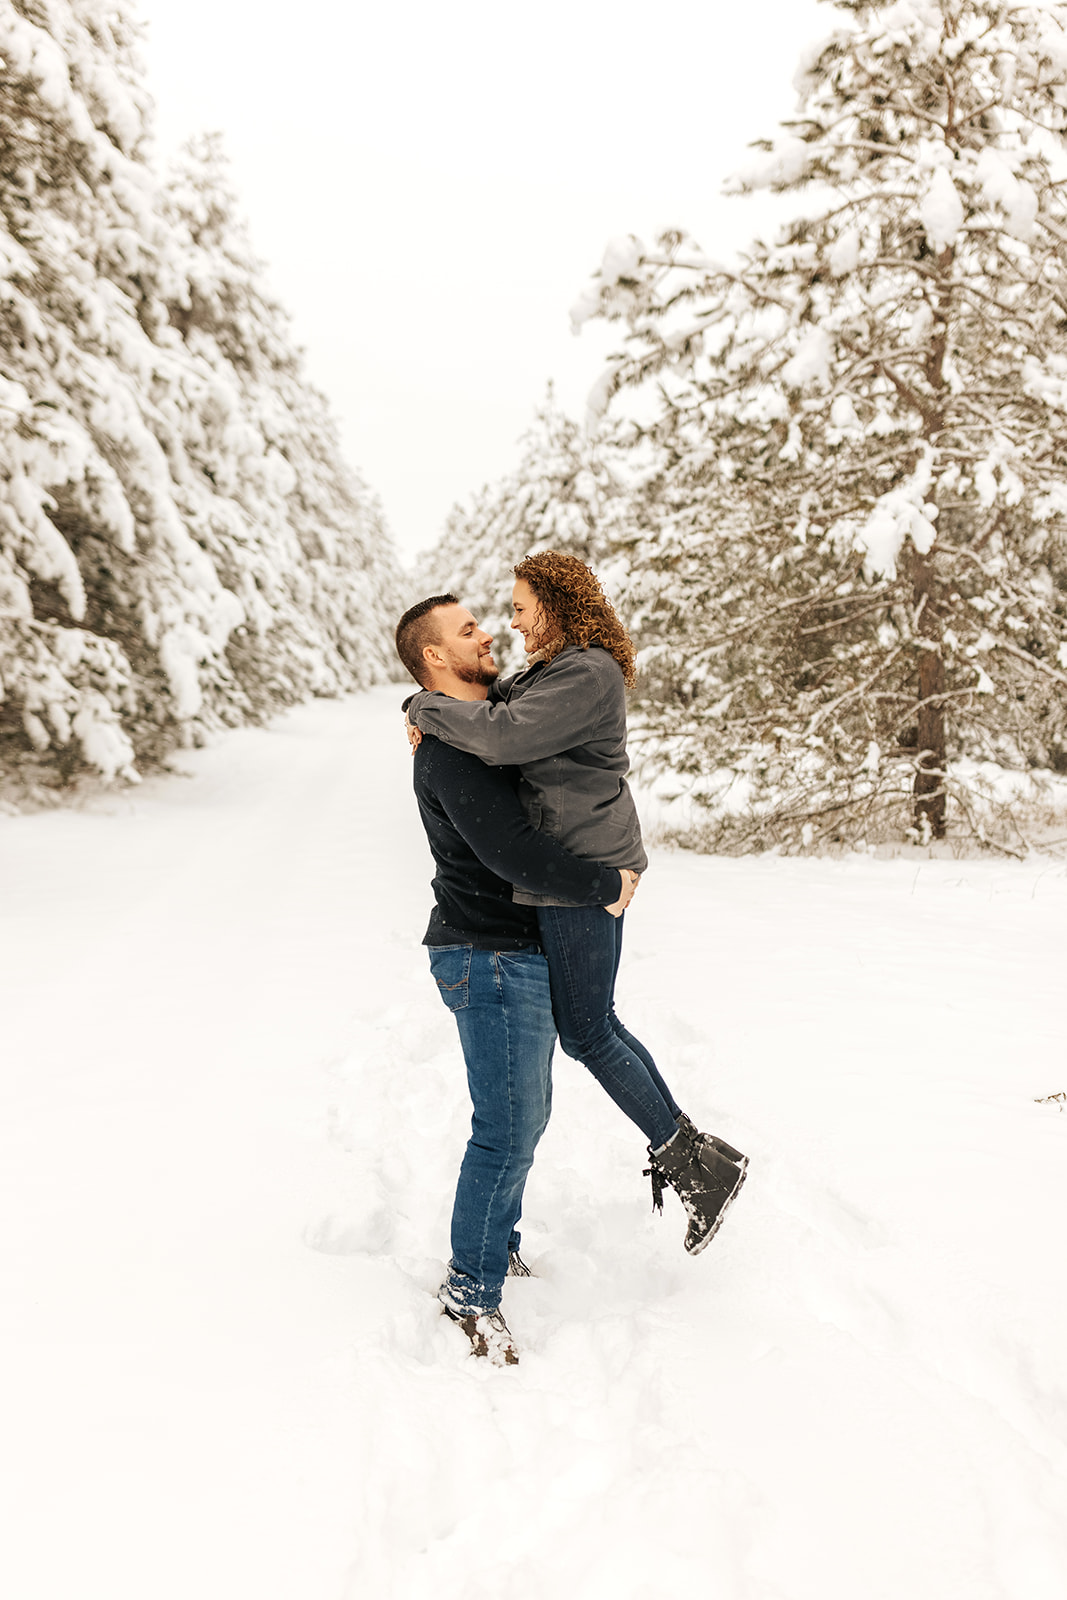 St Cloud MN engagement photography